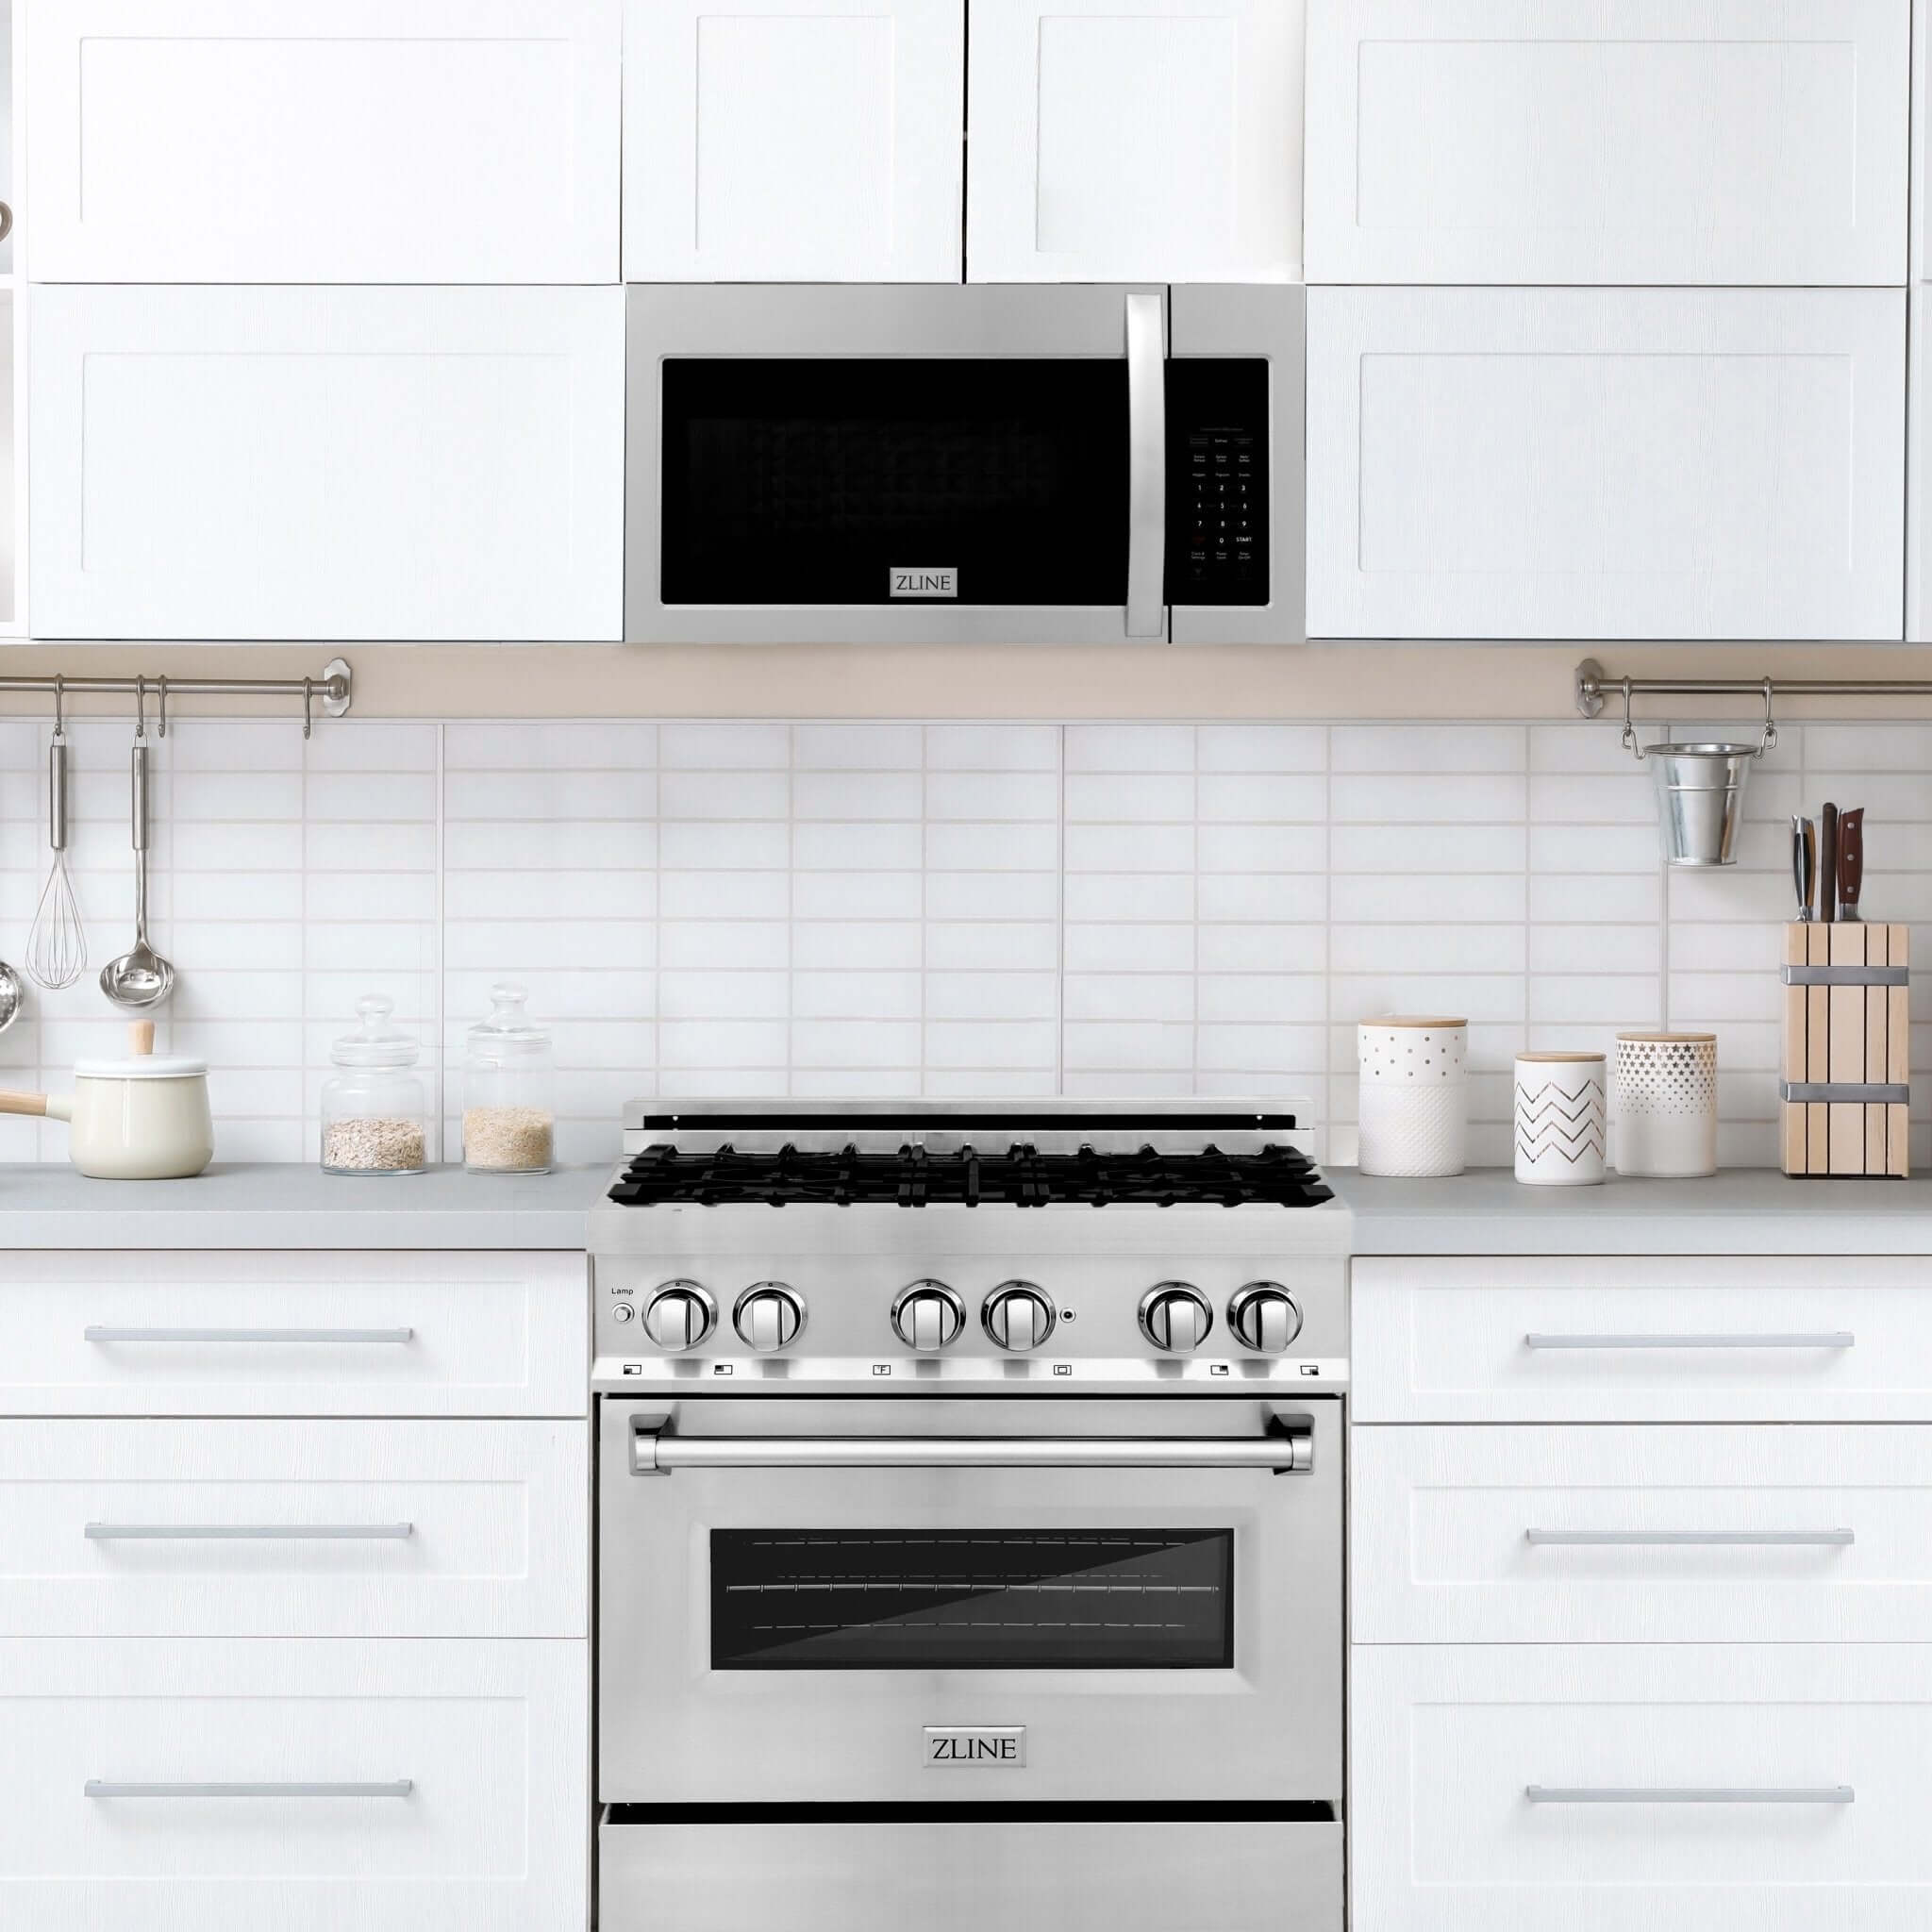 ZLINE Stainless Steel Over the Range Convection Microwave Oven with Modern Handle (MWO-OTR-30) in a modern farmhouse style kitchen over a range